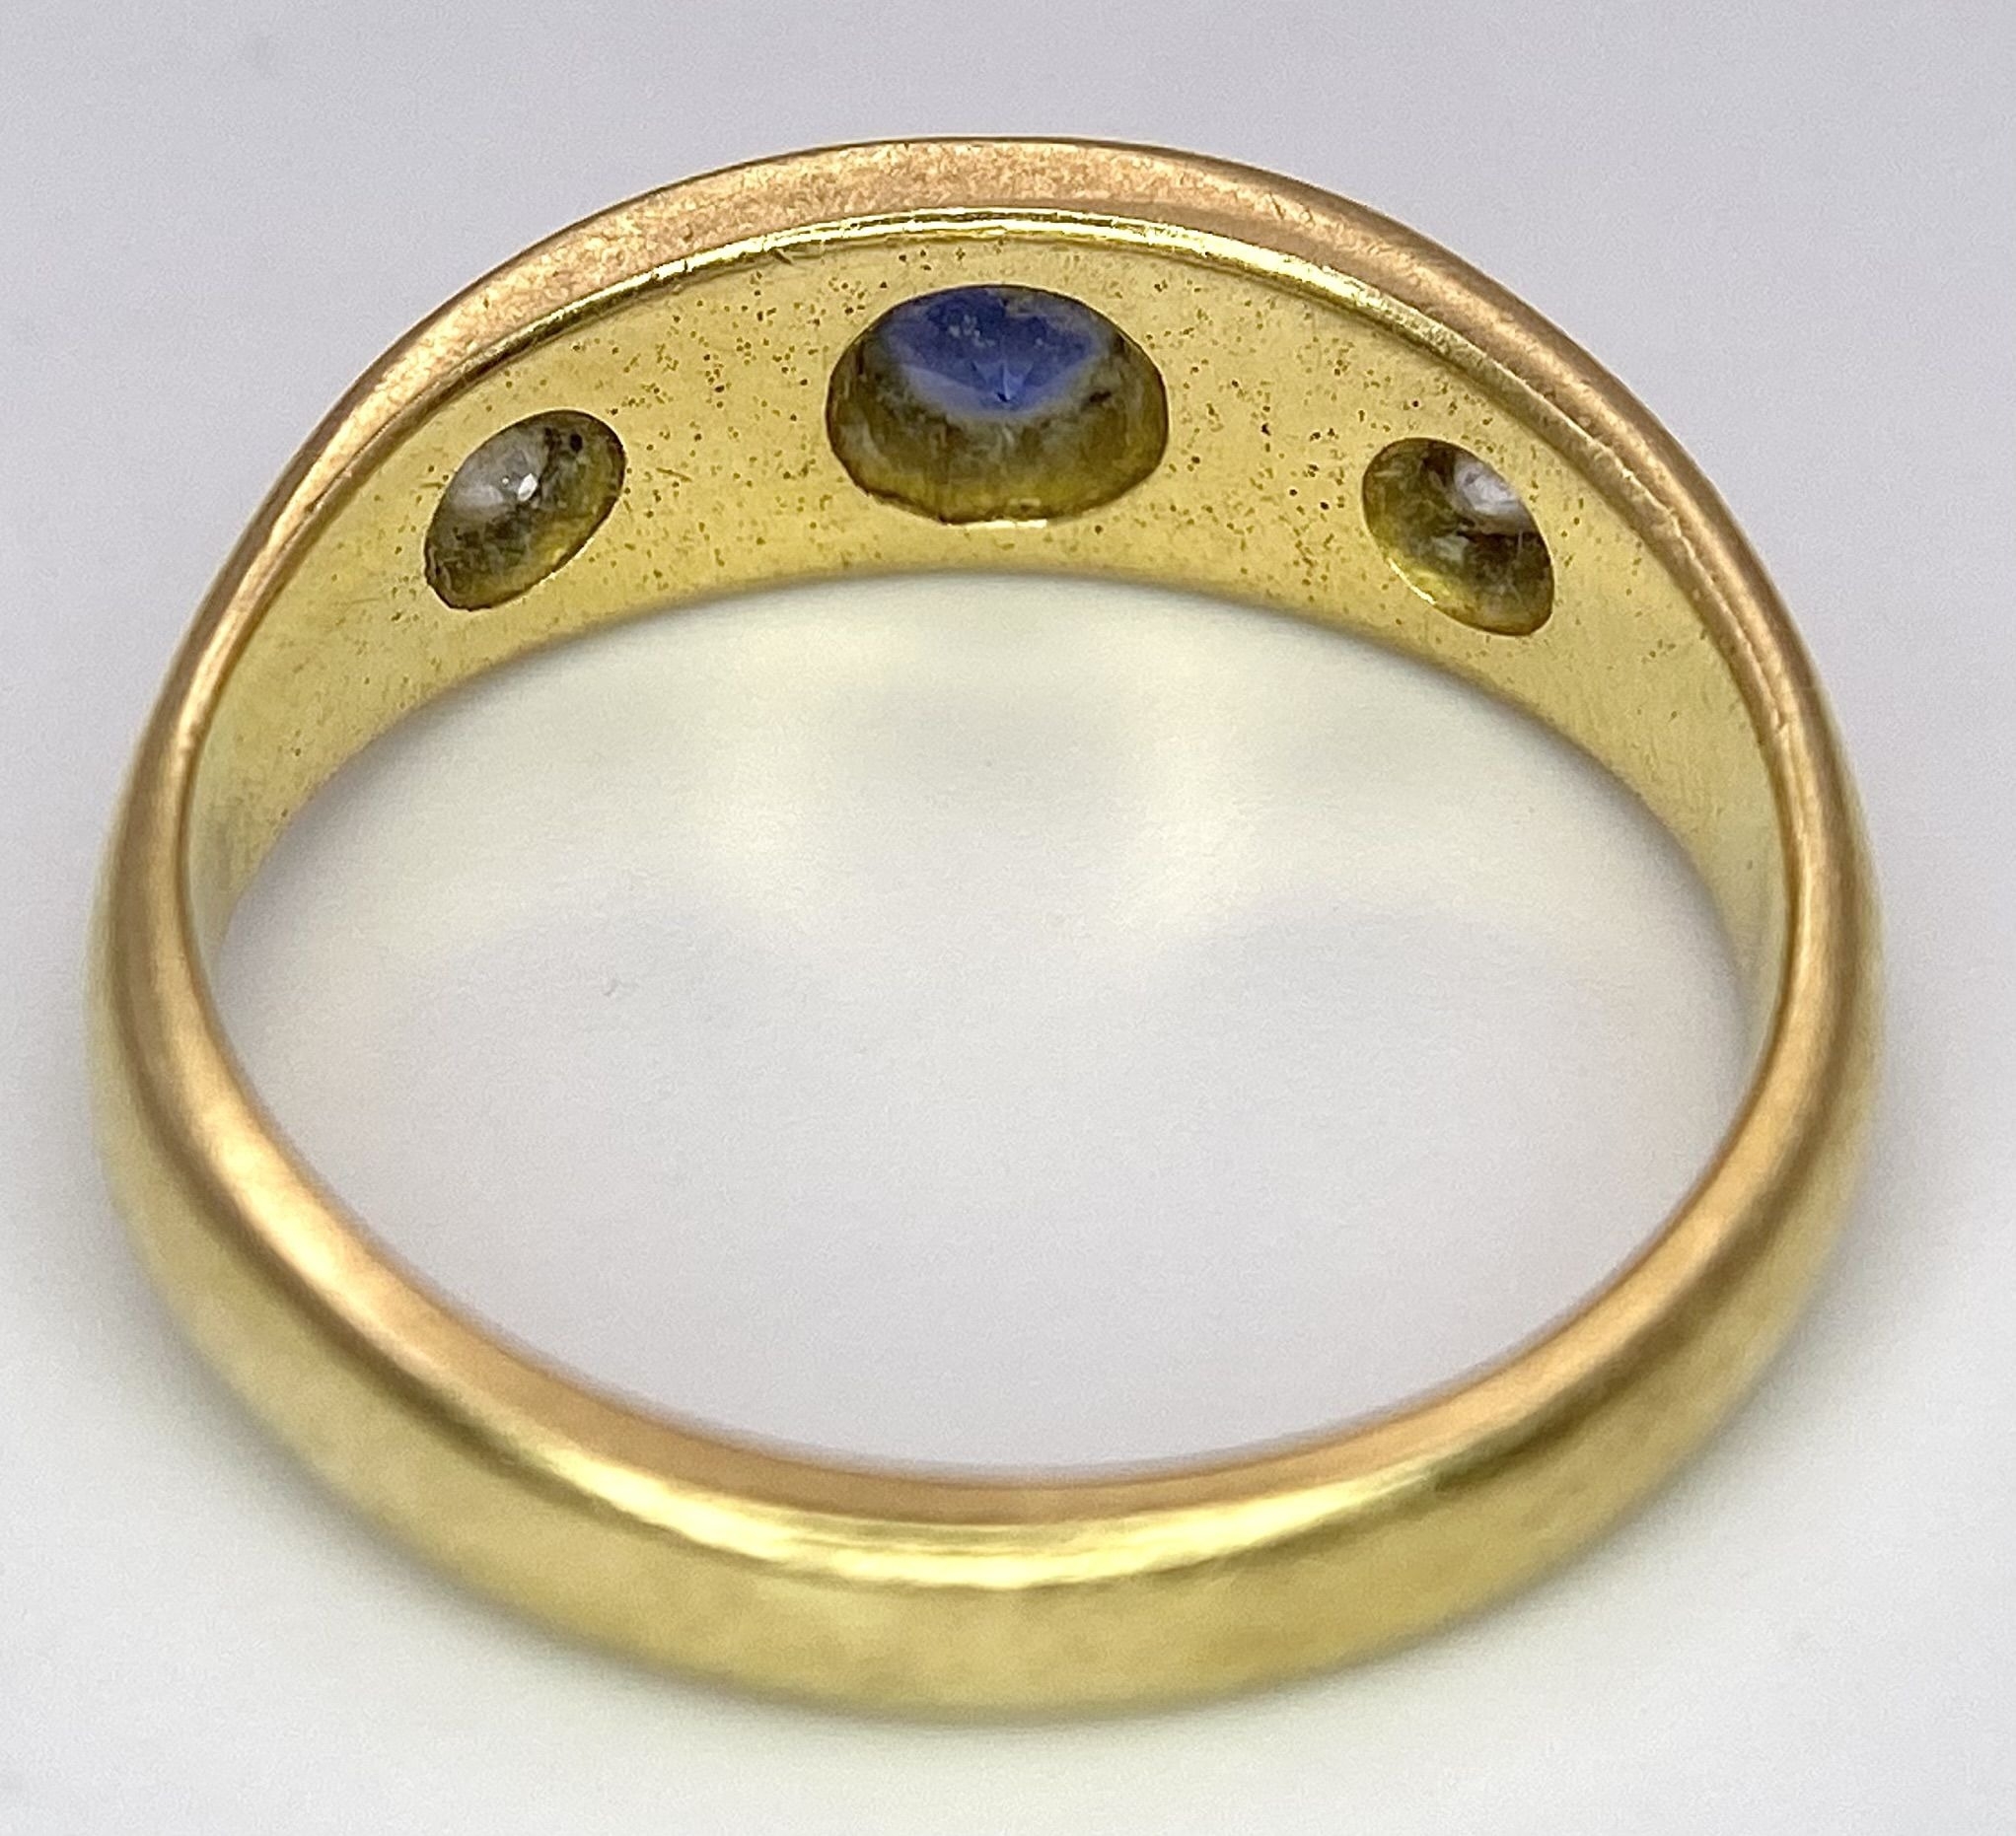 A Vintage 18K Yellow Gold Diamond and Sapphire Gypsy Ring. Size L. 4.6g total weight. - Image 5 of 6